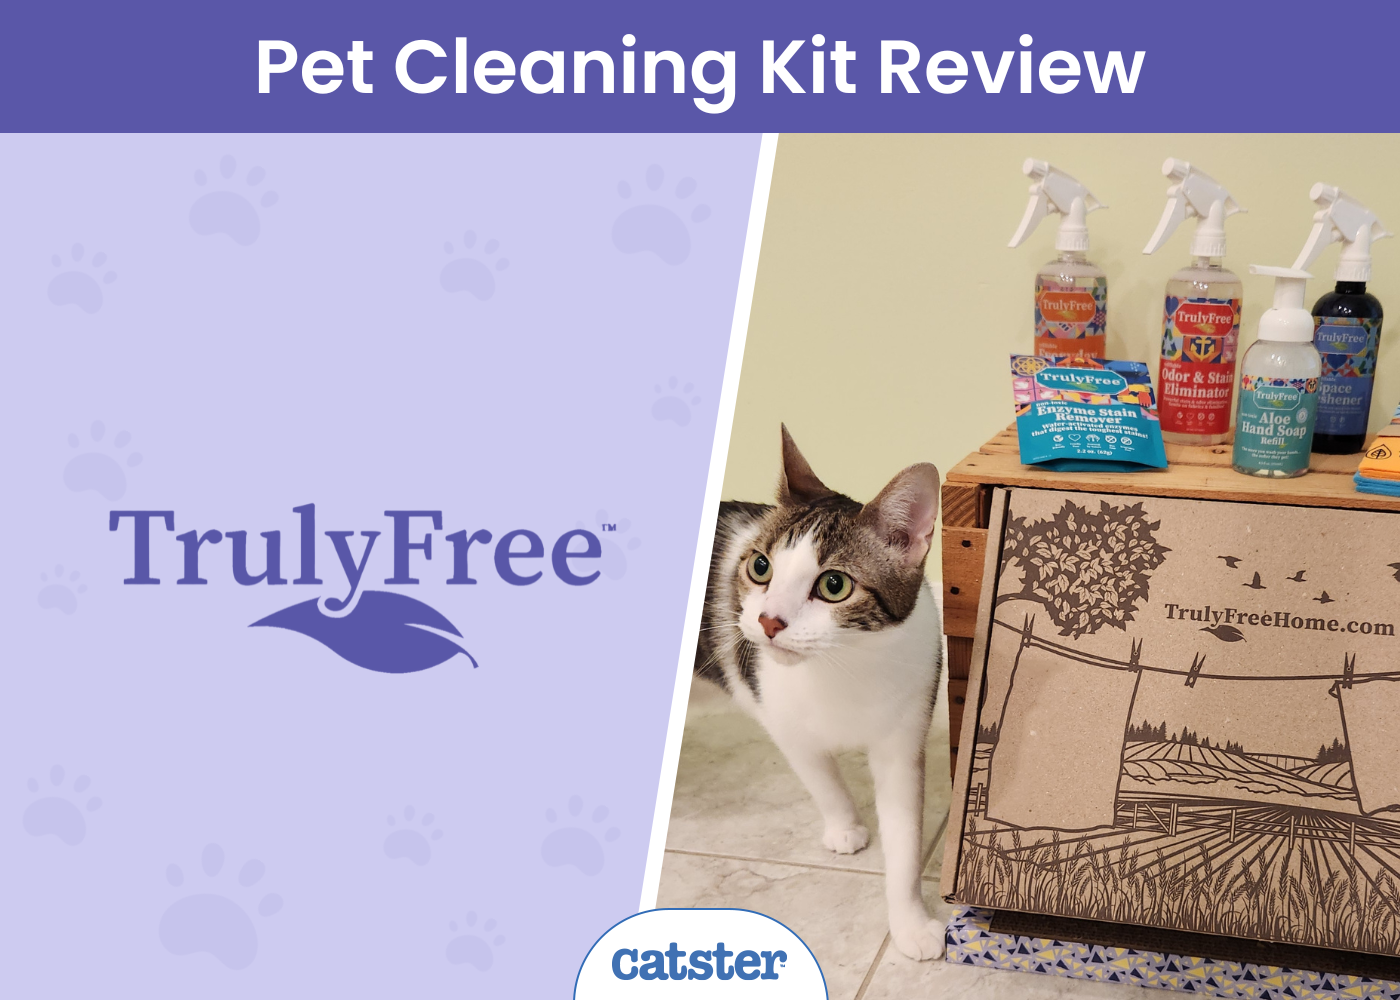 TrulyFree Pet Cleaning Kit